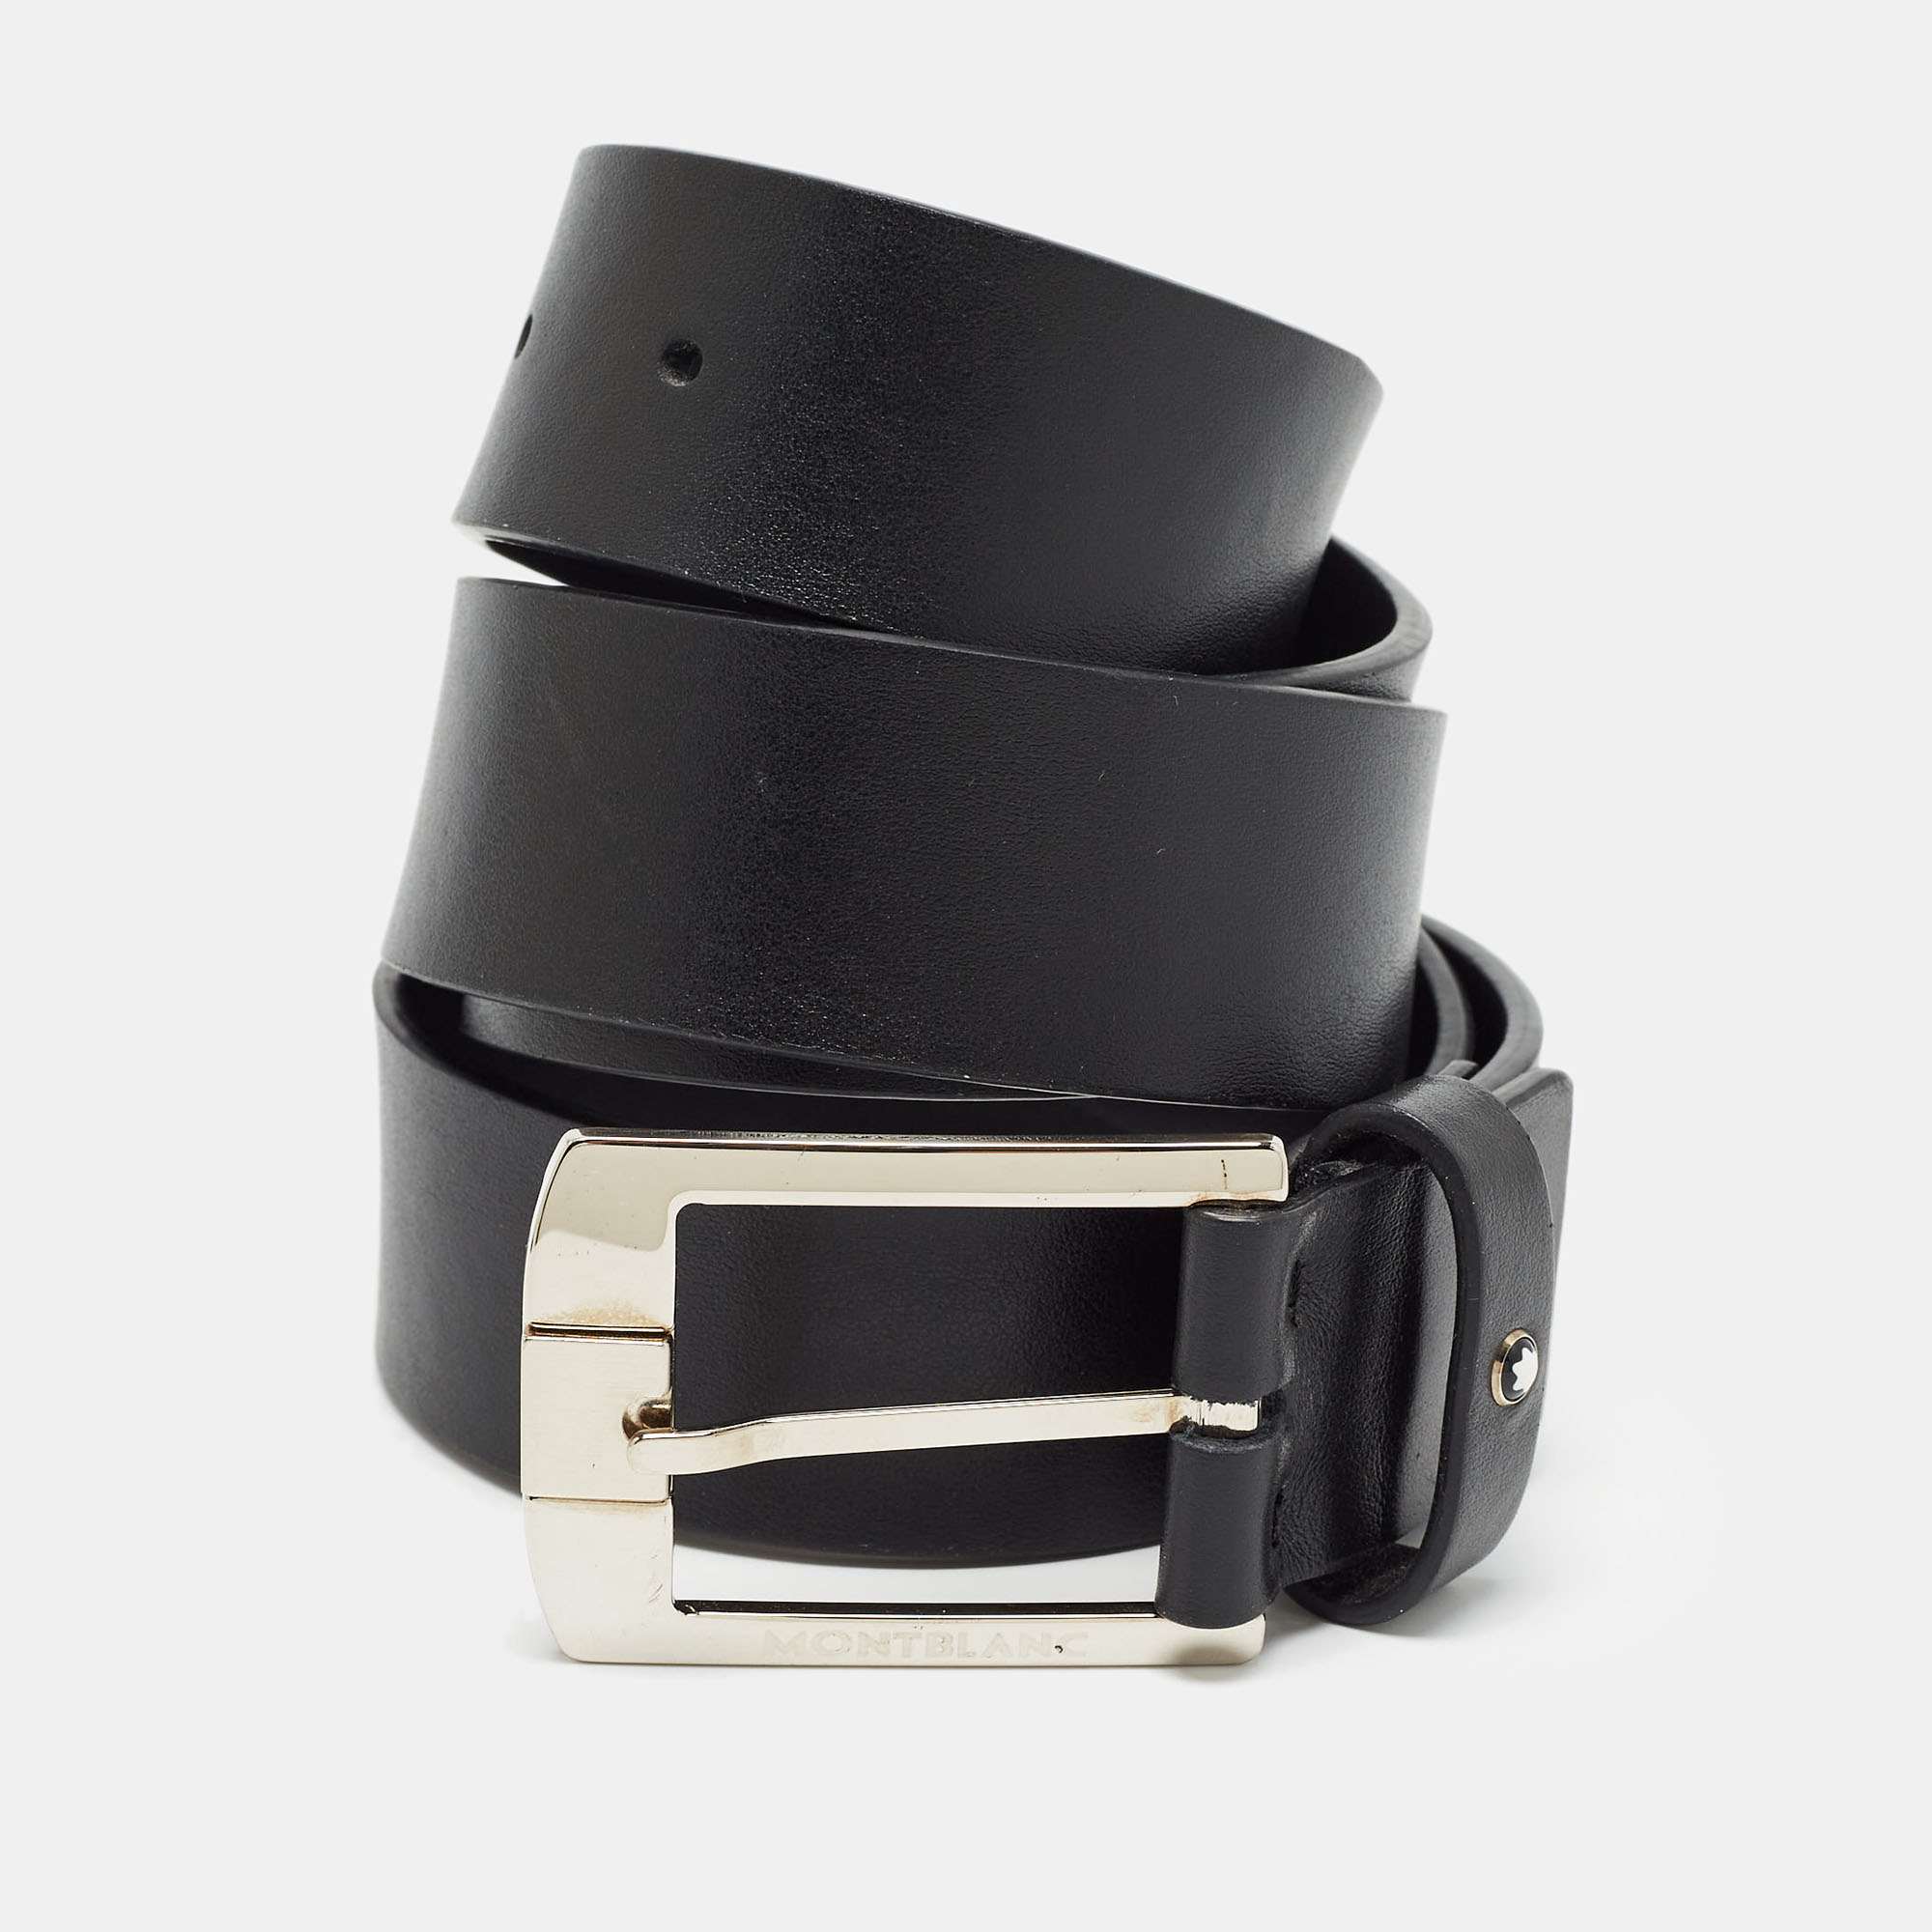 Add a sleek finish to your OOTD with this Montblanc mens belt. It is carefully crafted to last well and boost your style for a long time.